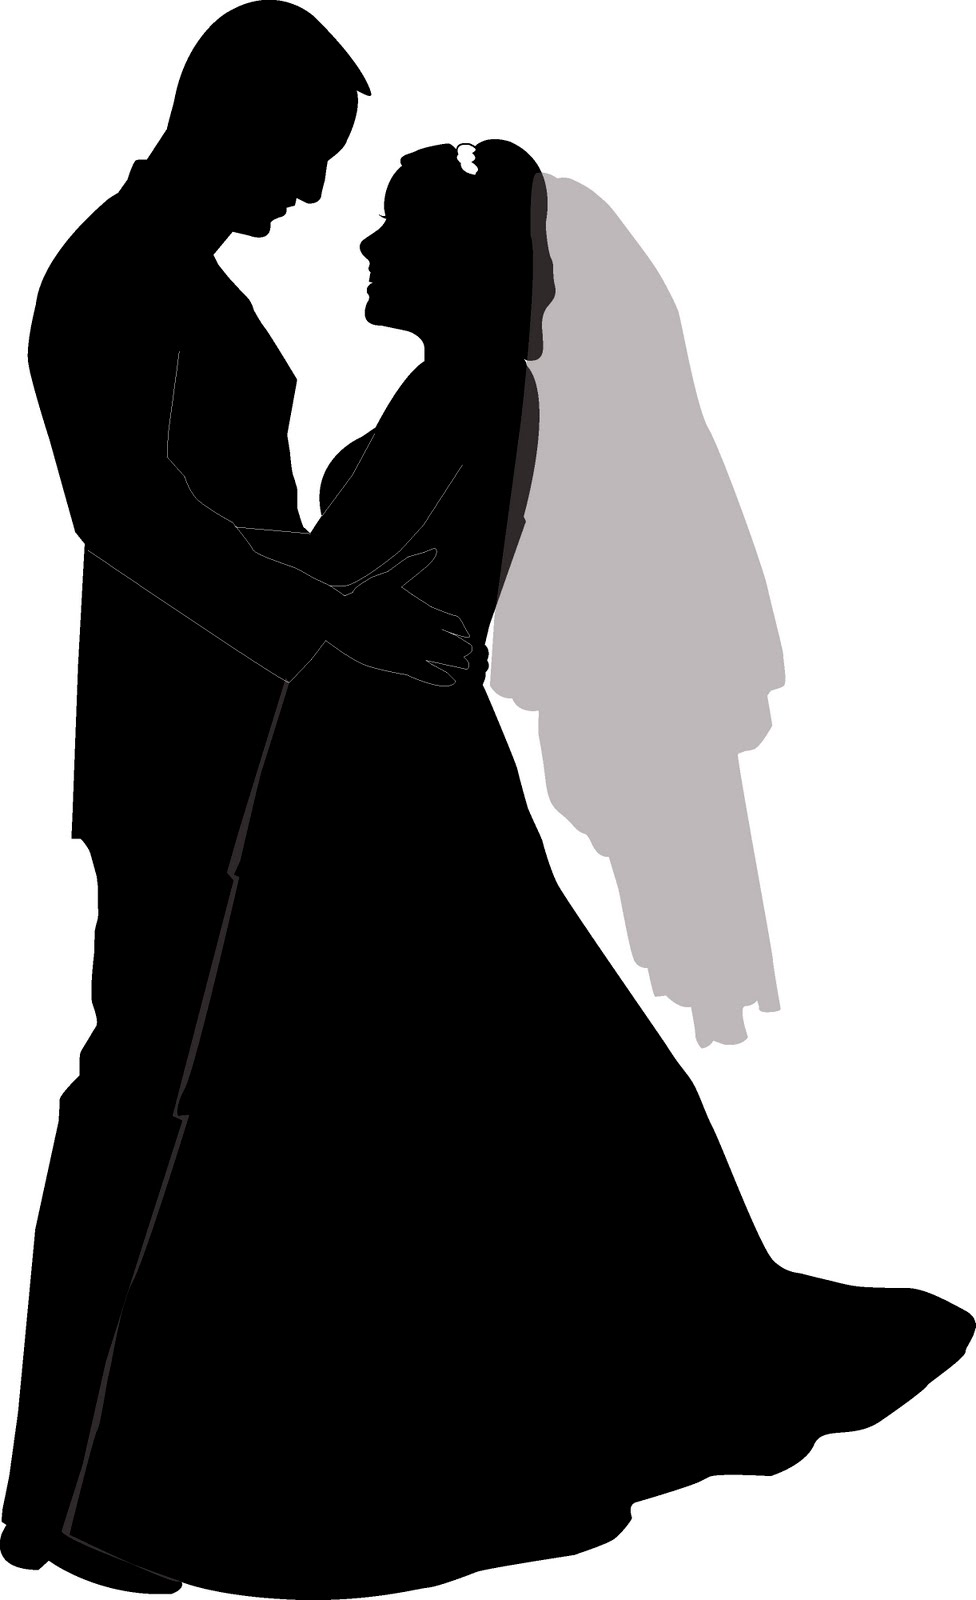 Married couple silhouette clipart 